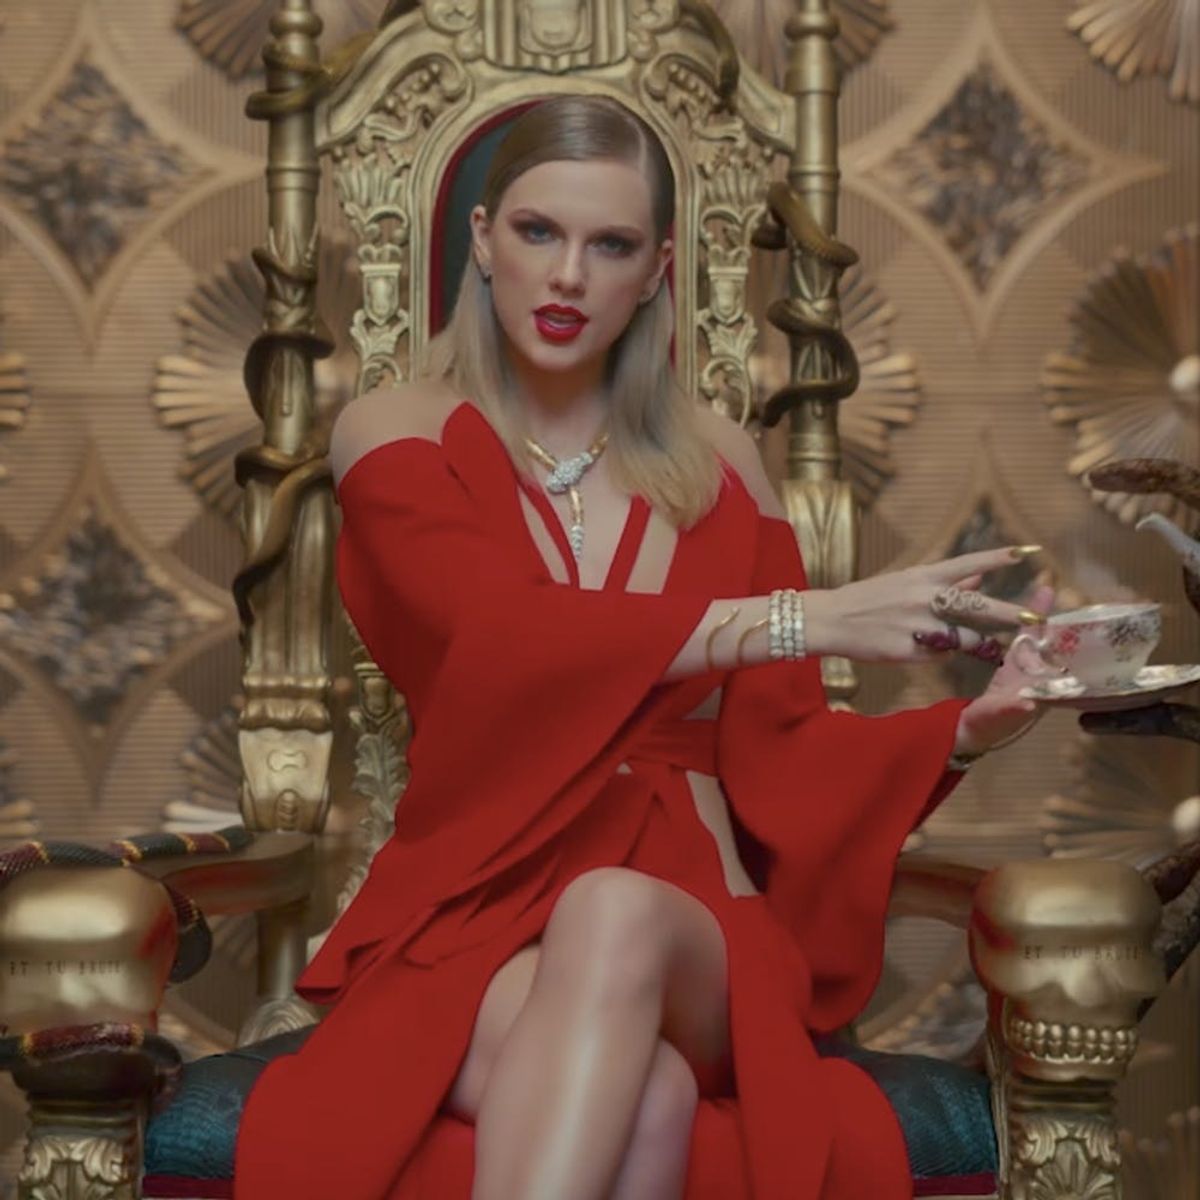 You Need These Covers and Mashups of Taylor Swift’s “Look What You Made Me Do” in Your Life